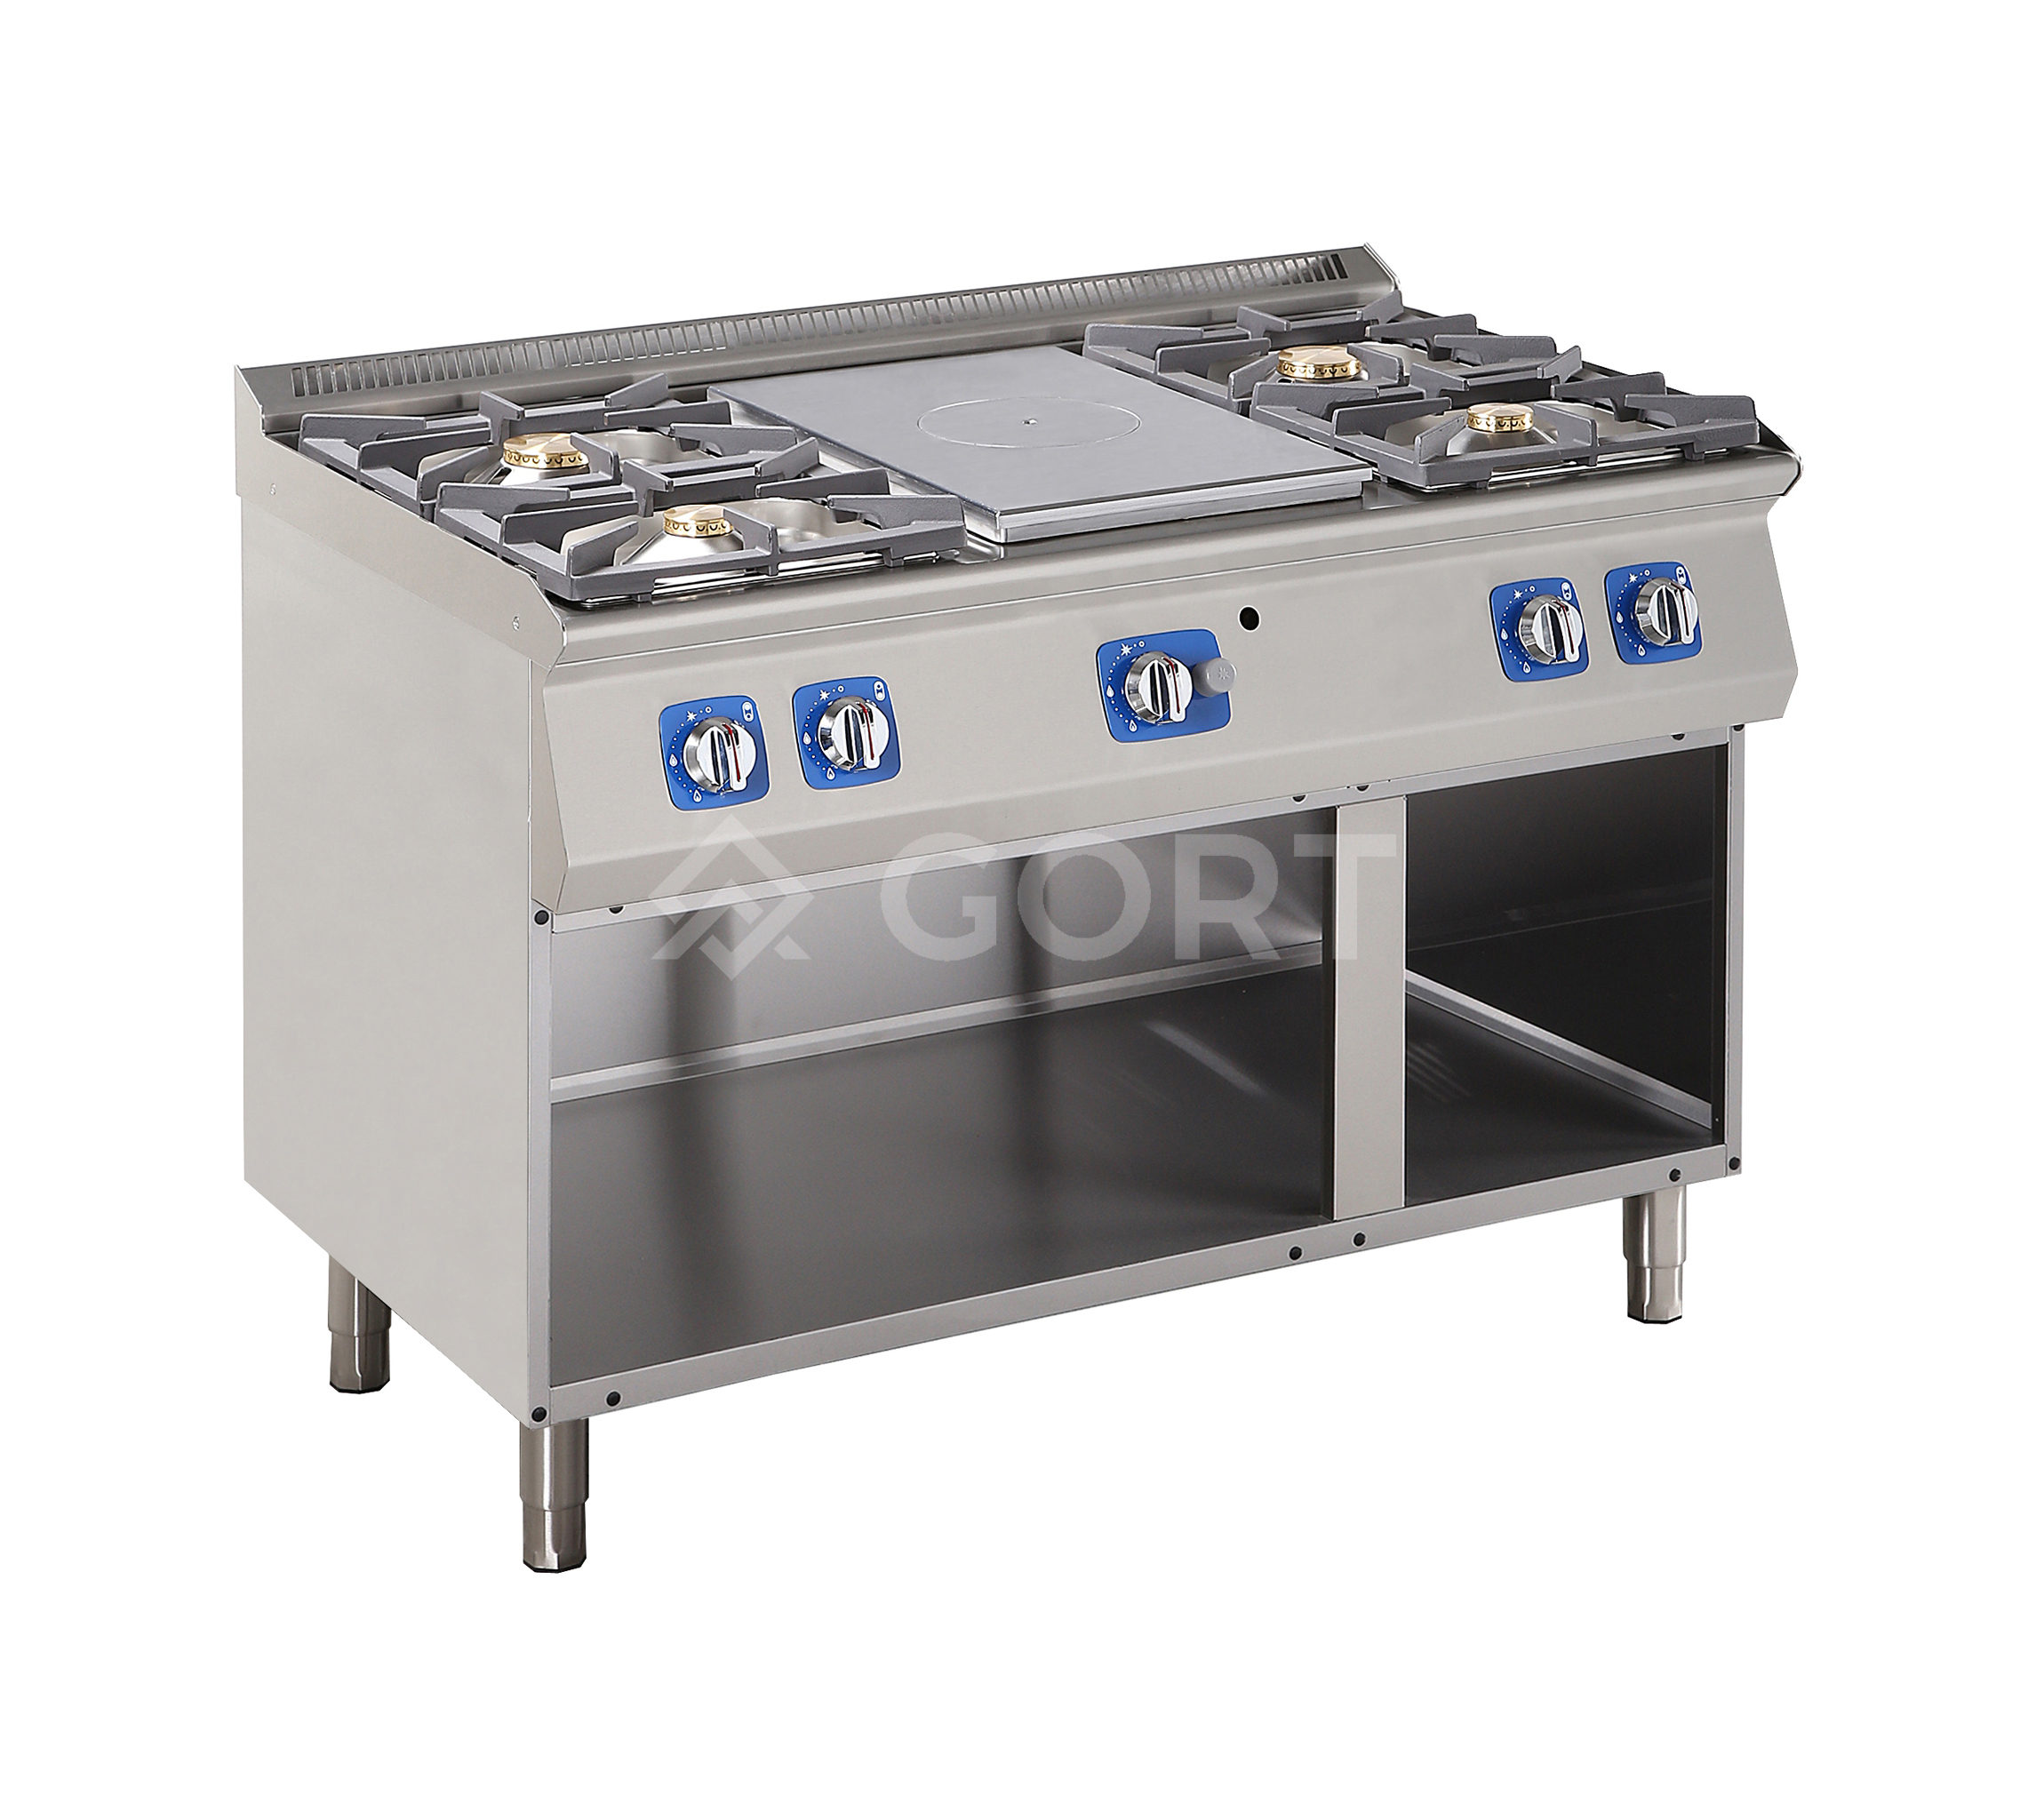 Gas solid top with 4 burner gas cooking range on open base